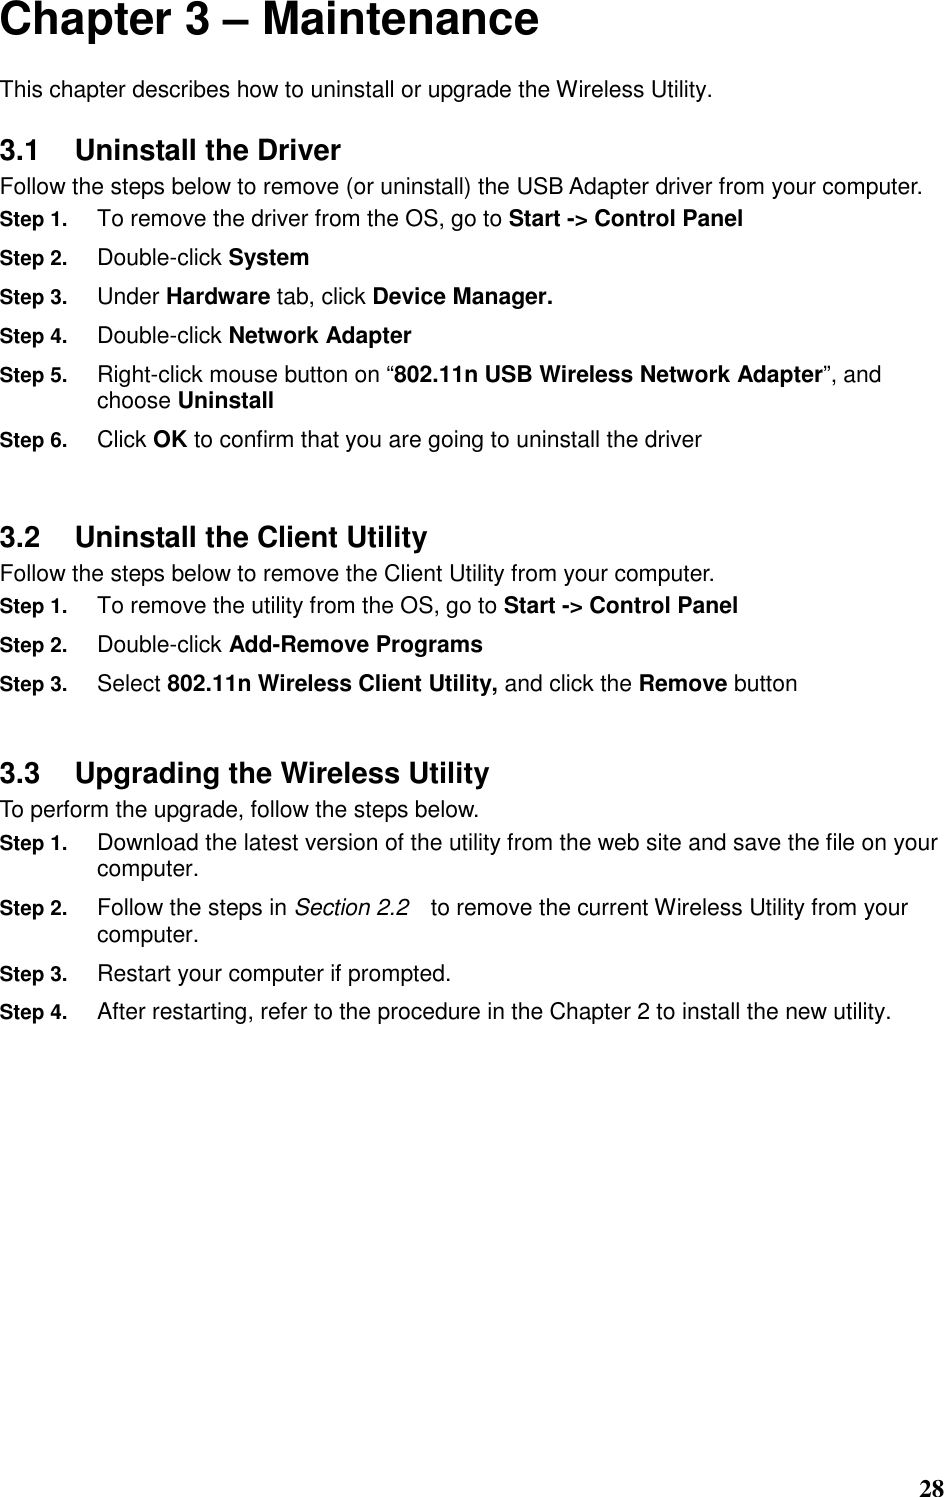  28 Chapter 3 – Maintenance This chapter describes how to uninstall or upgrade the Wireless Utility. 3.1  Uninstall the Driver Follow the steps below to remove (or uninstall) the USB Adapter driver from your computer.   Step 1. To remove the driver from the OS, go to Start -&gt; Control Panel Step 2. Double-click System Step 3. Under Hardware tab, click Device Manager.   Step 4. Double-click Network Adapter Step 5. Right-click mouse button on “802.11n USB Wireless Network Adapter”, and choose Uninstall Step 6. Click OK to confirm that you are going to uninstall the driver  3.2  Uninstall the Client Utility Follow the steps below to remove the Client Utility from your computer.   Step 1. To remove the utility from the OS, go to Start -&gt; Control Panel   Step 2. Double-click Add-Remove Programs Step 3. Select 802.11n Wireless Client Utility, and click the Remove button  3.3  Upgrading the Wireless Utility To perform the upgrade, follow the steps below. Step 1. Download the latest version of the utility from the web site and save the file on your computer. Step 2. Follow the steps in Section 2.2    to remove the current Wireless Utility from your computer.   Step 3. Restart your computer if prompted. Step 4. After restarting, refer to the procedure in the Chapter 2 to install the new utility.       